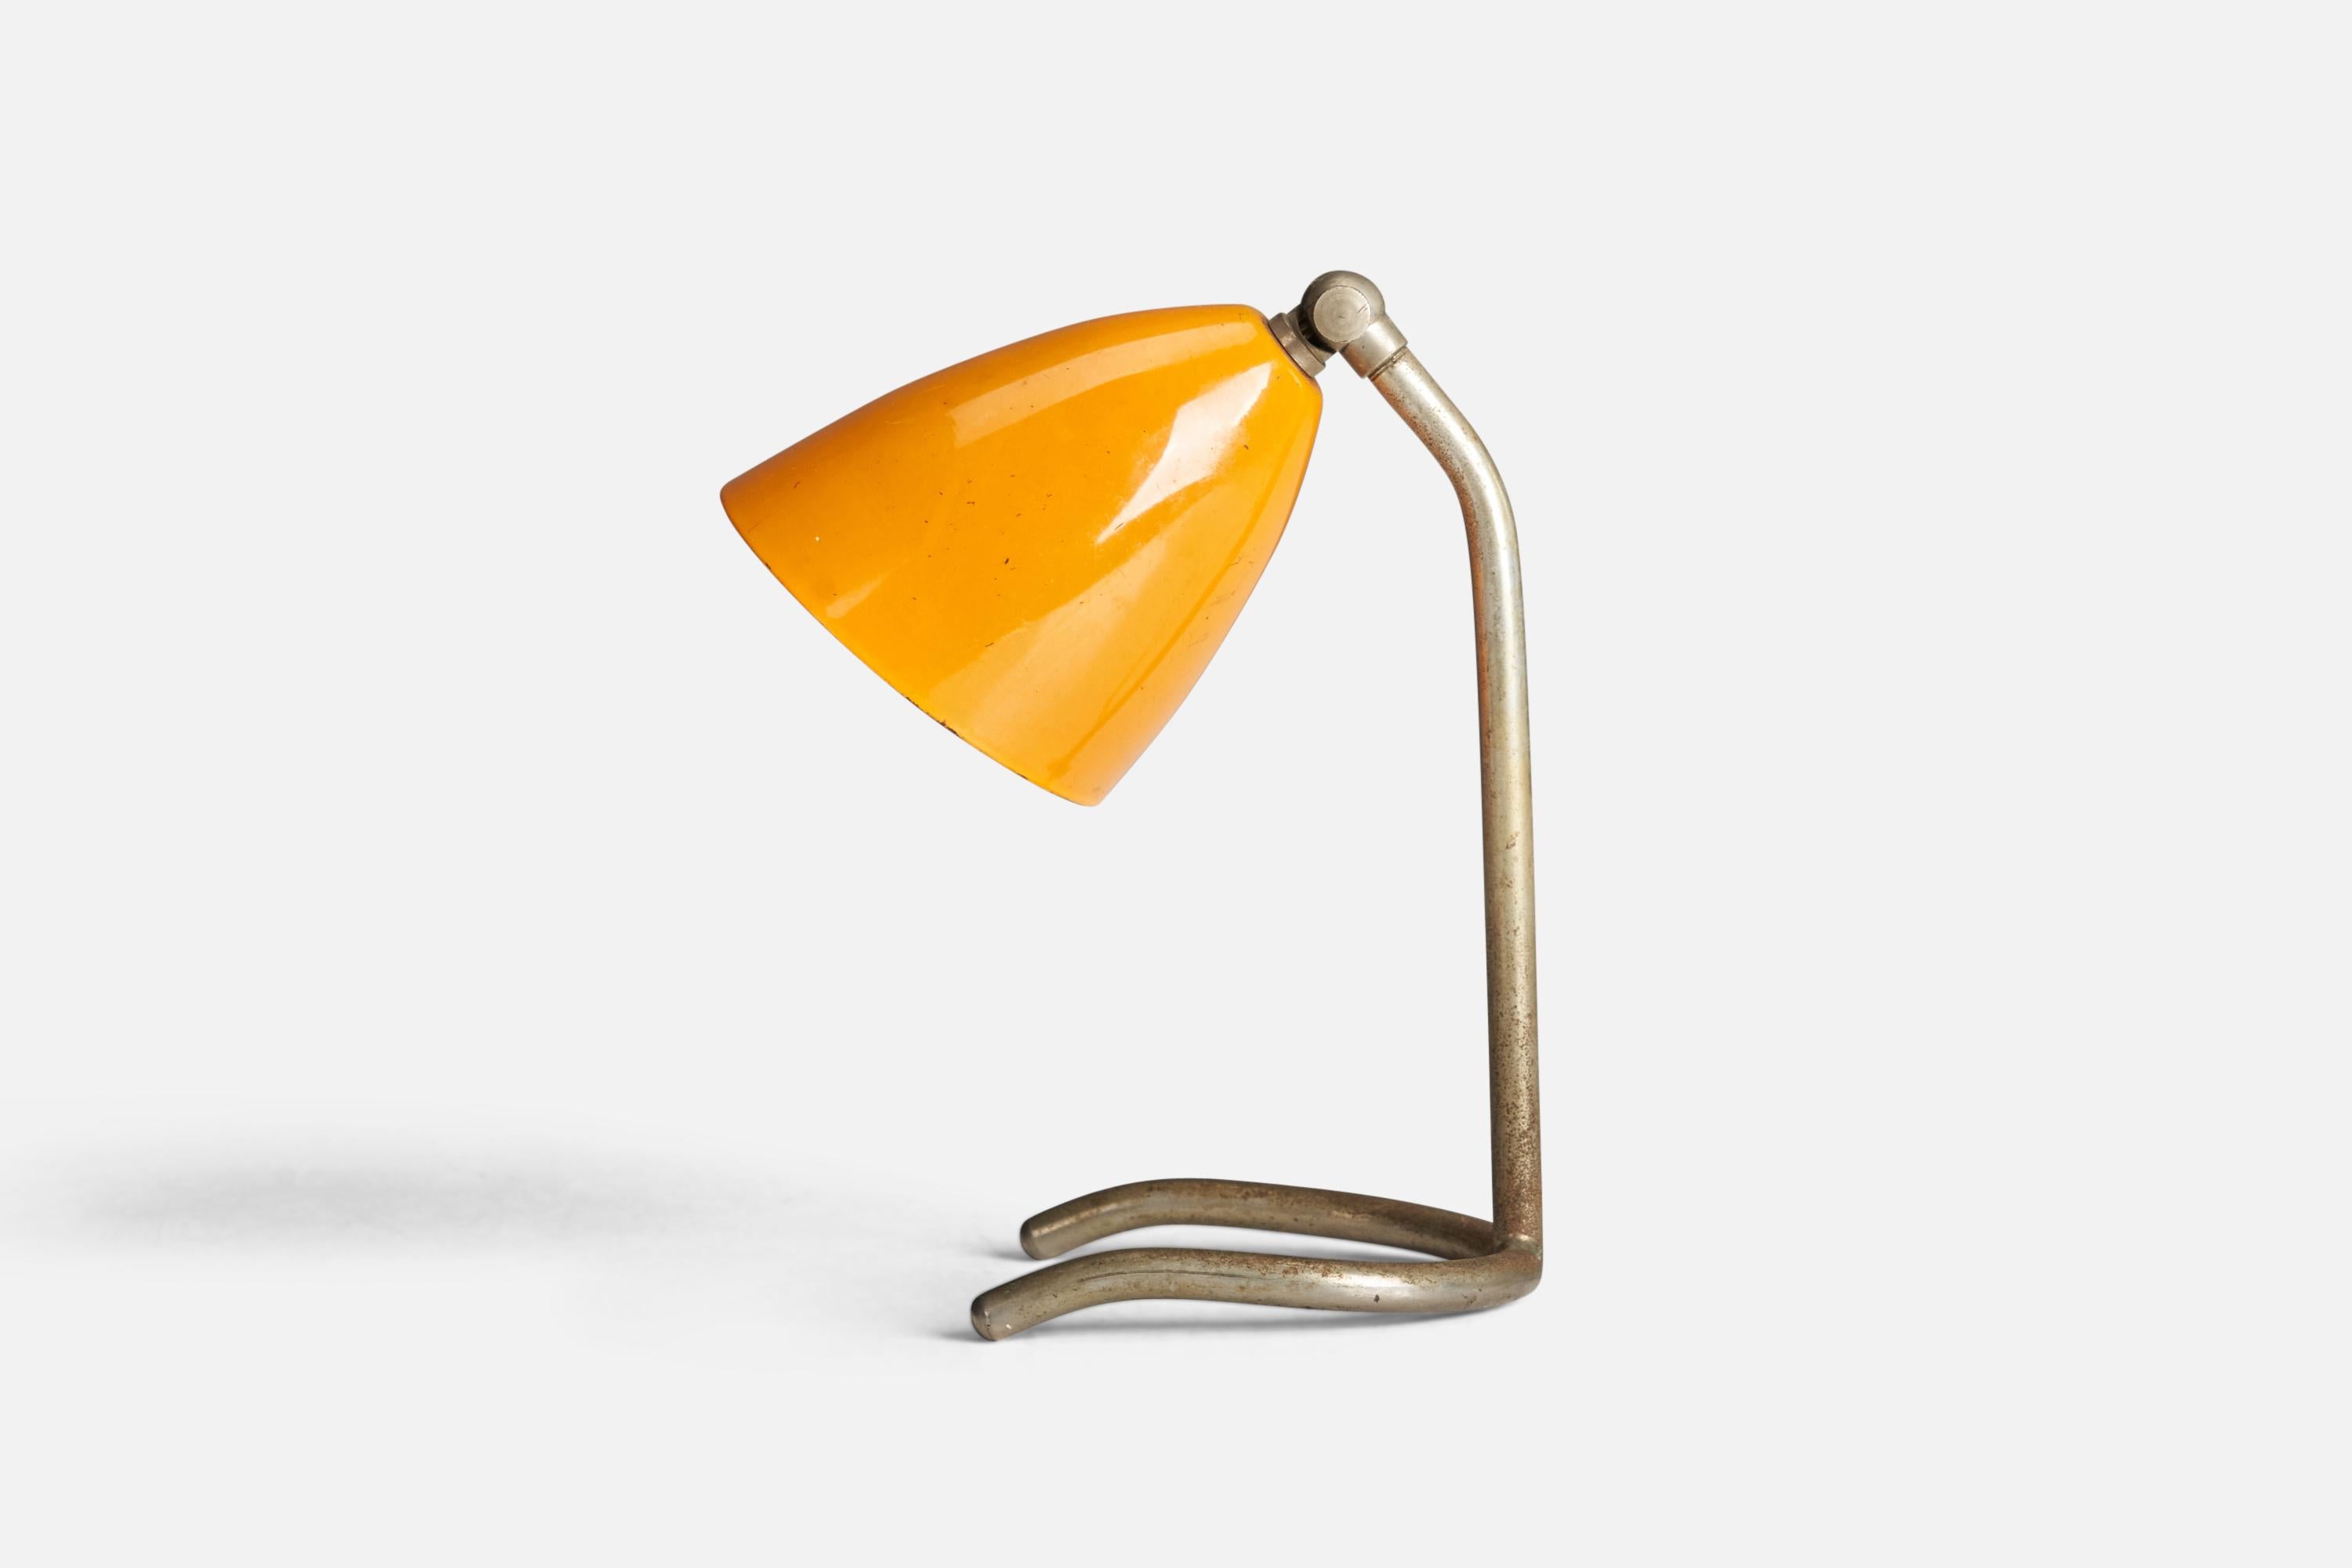 A steel and yellow-lacquered metal table lamp designed and produced by an Italian Designer, Italy, 1950s.

Socket takes E-14 bulb.

There is no maximum wattage stated on the fixture.